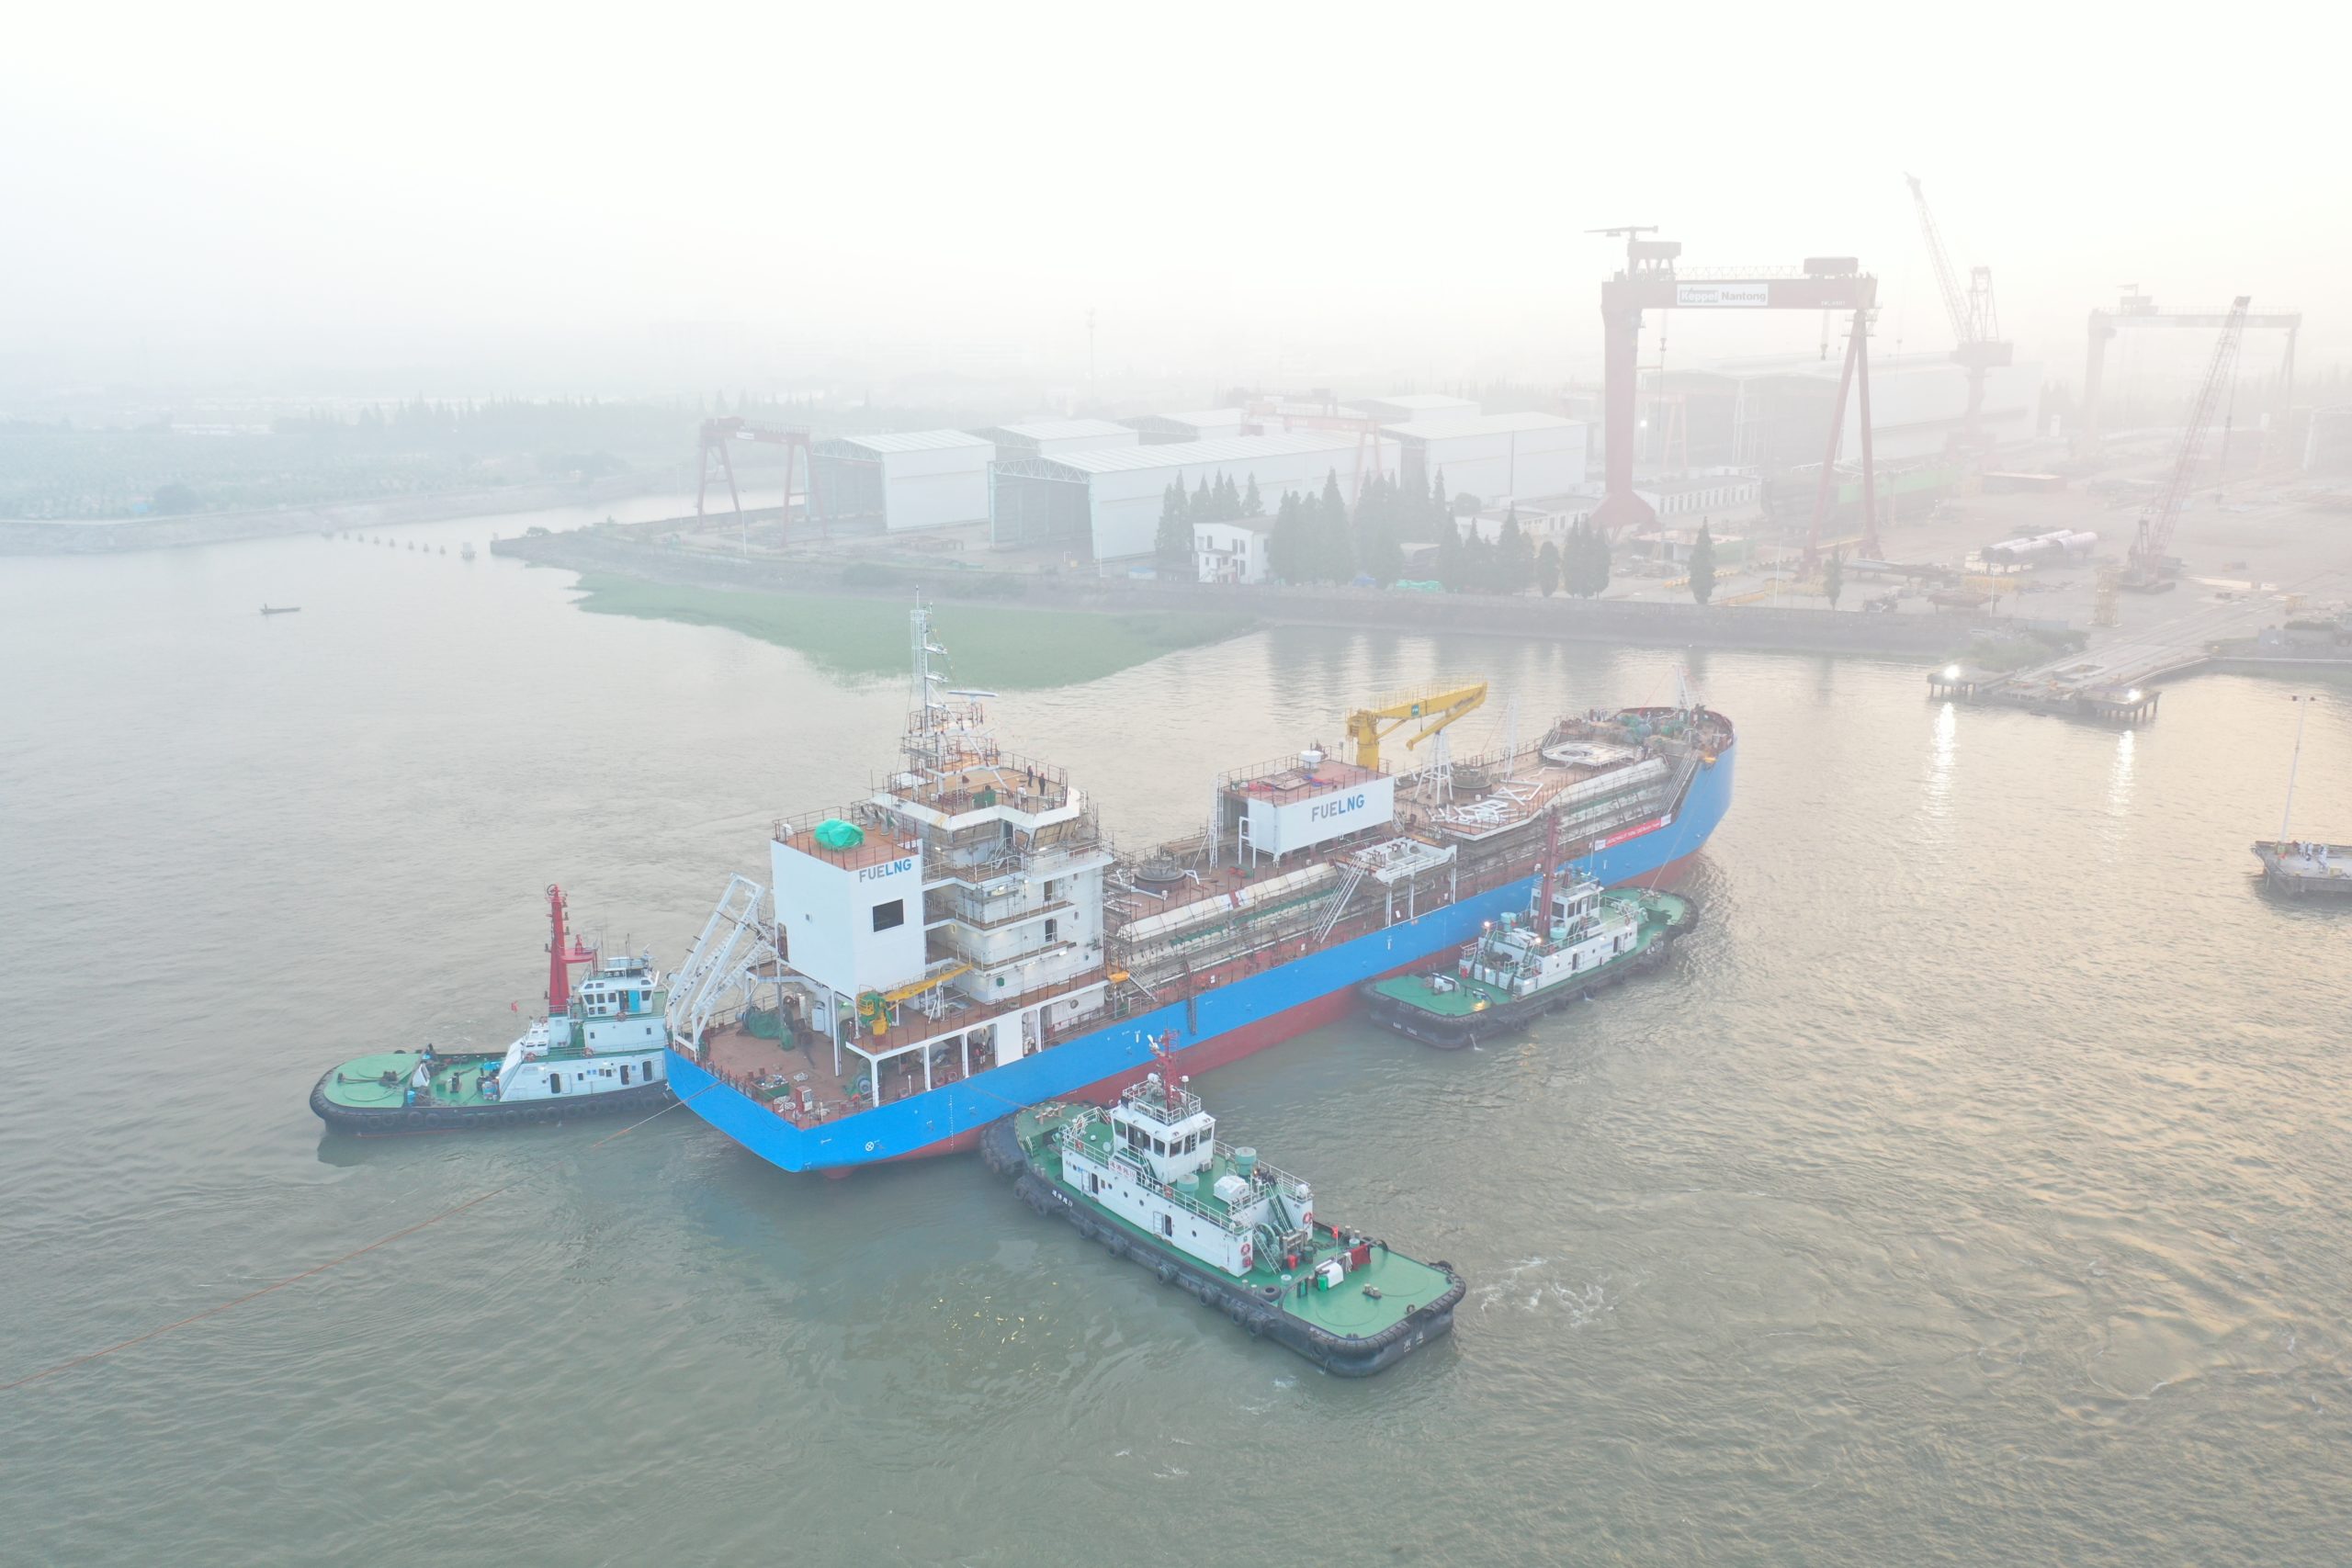 Singapore’s first LNG bunkering vessel launched